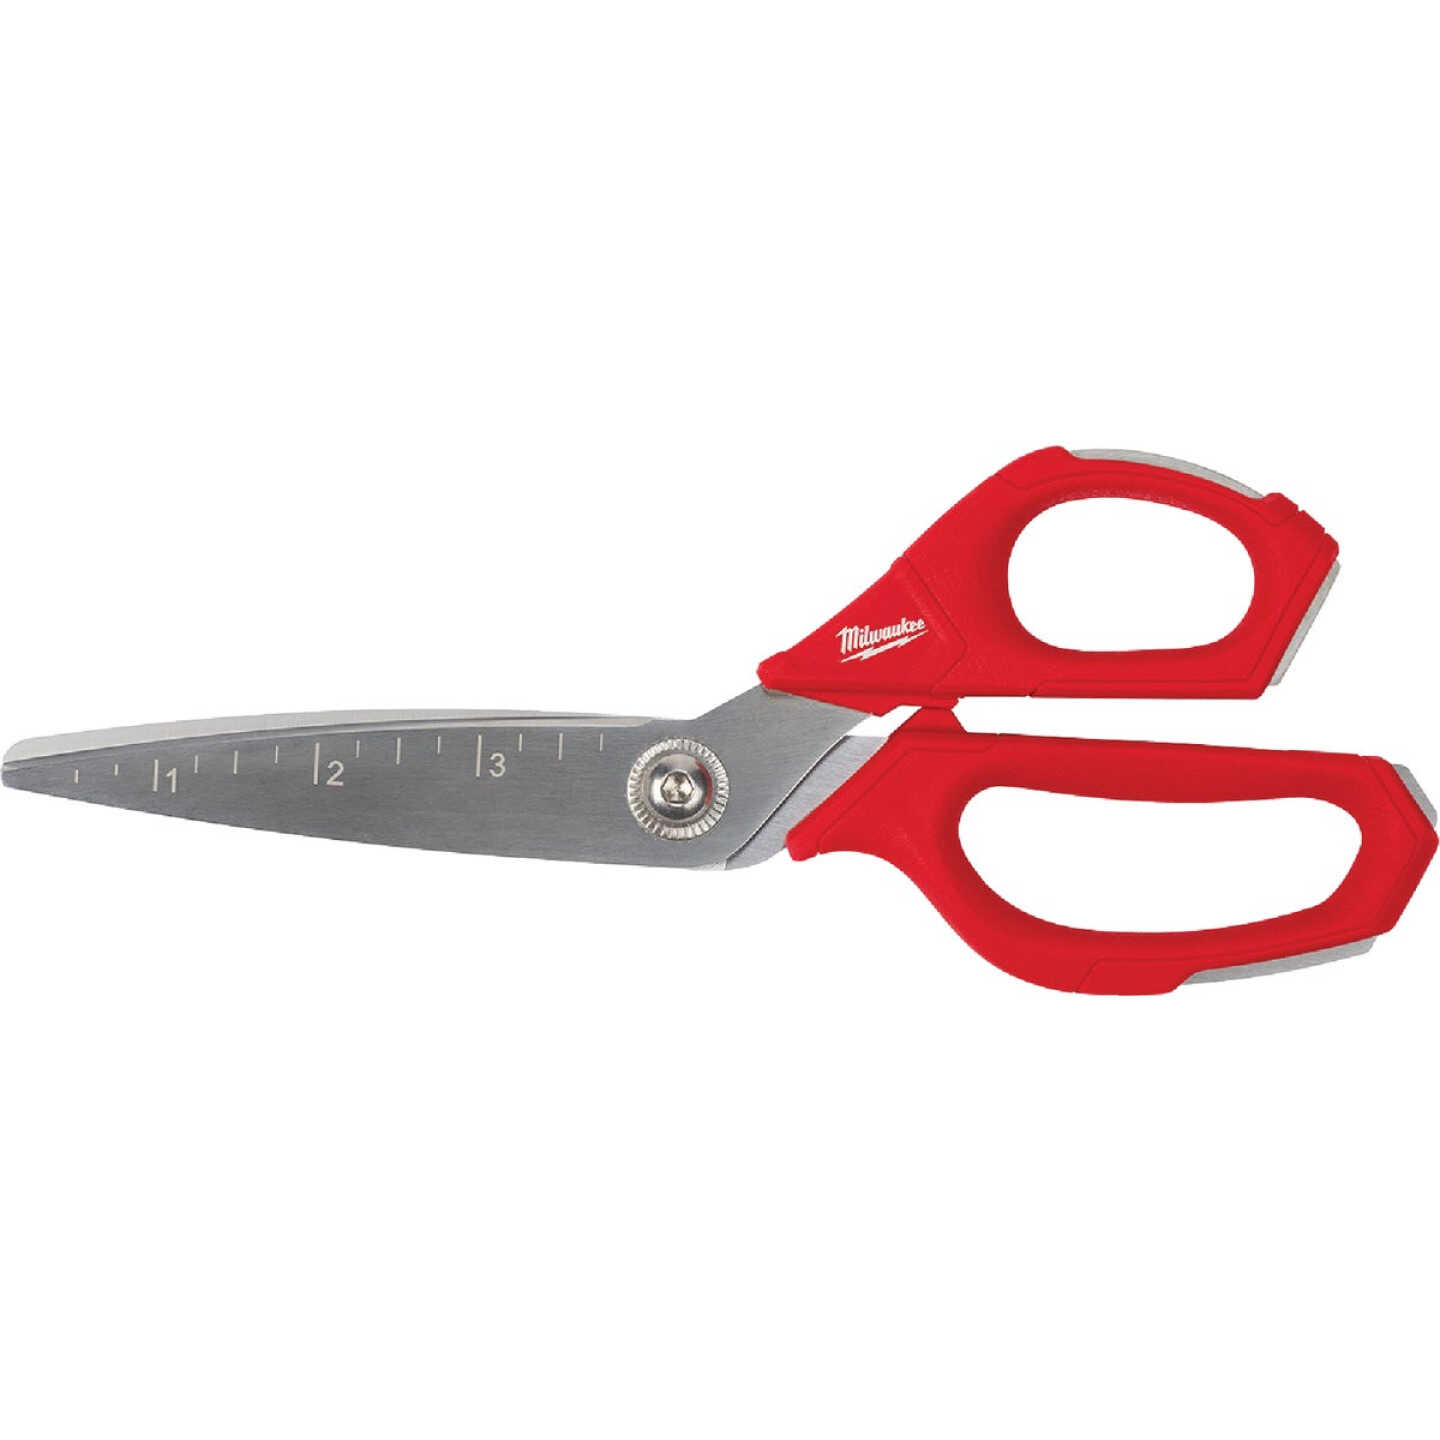 Stainless Fishing Scissors with PP Handle - China Fishing Scissors